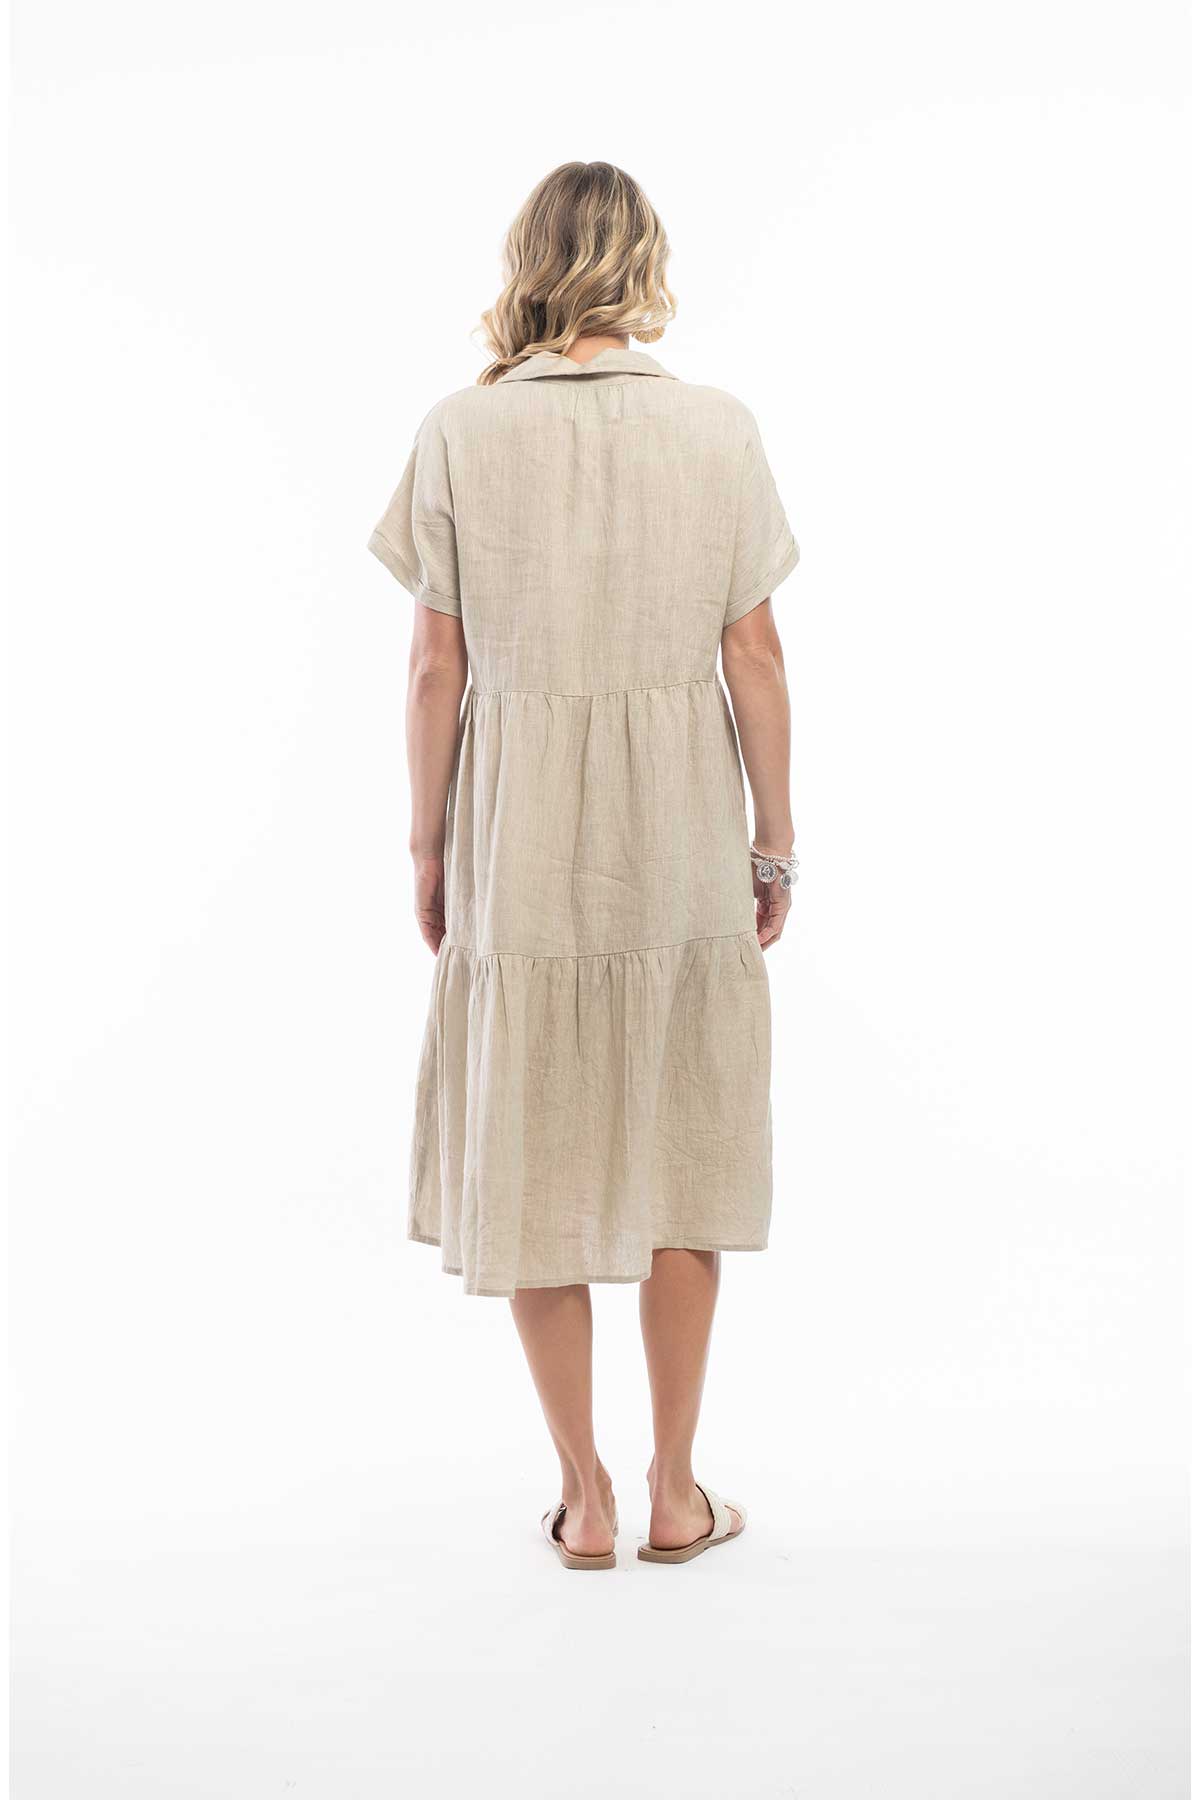 Orientique Dress - Solid Pure Linen Dress Collar Midi Layers back view in fog